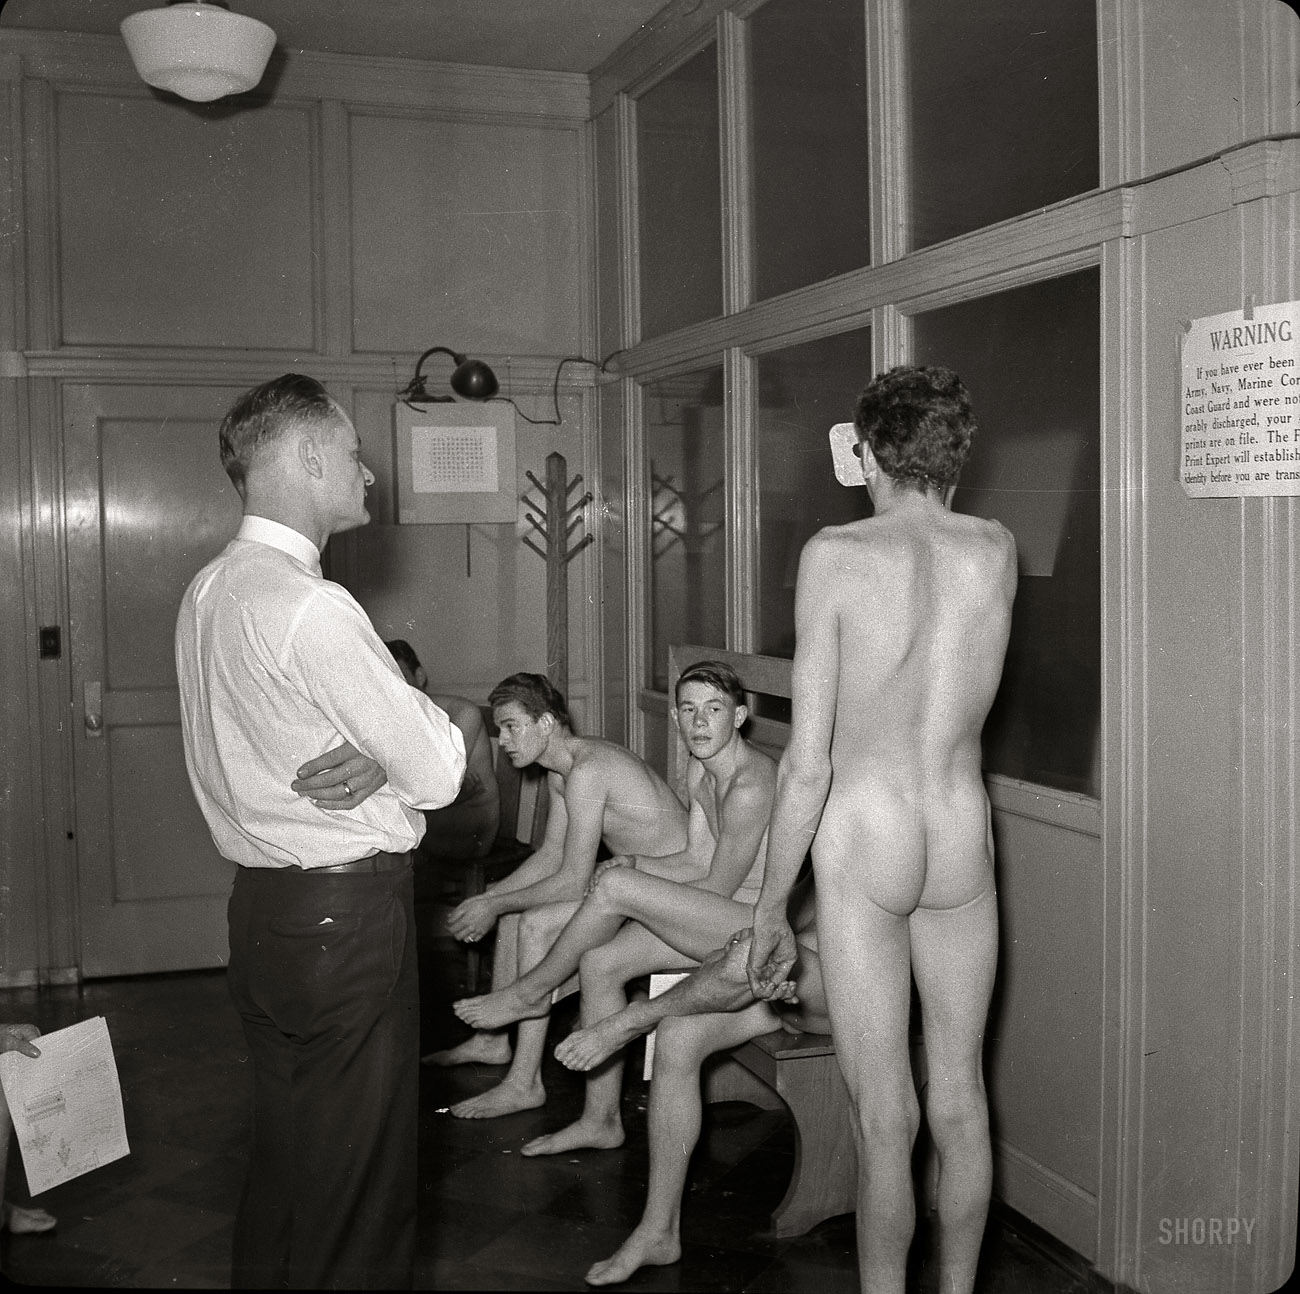 "December 1941. Enlisting in the Marines. Recruiting office, San Francisco." Nitrate negative by John Collier, Office of War Information. View full size.